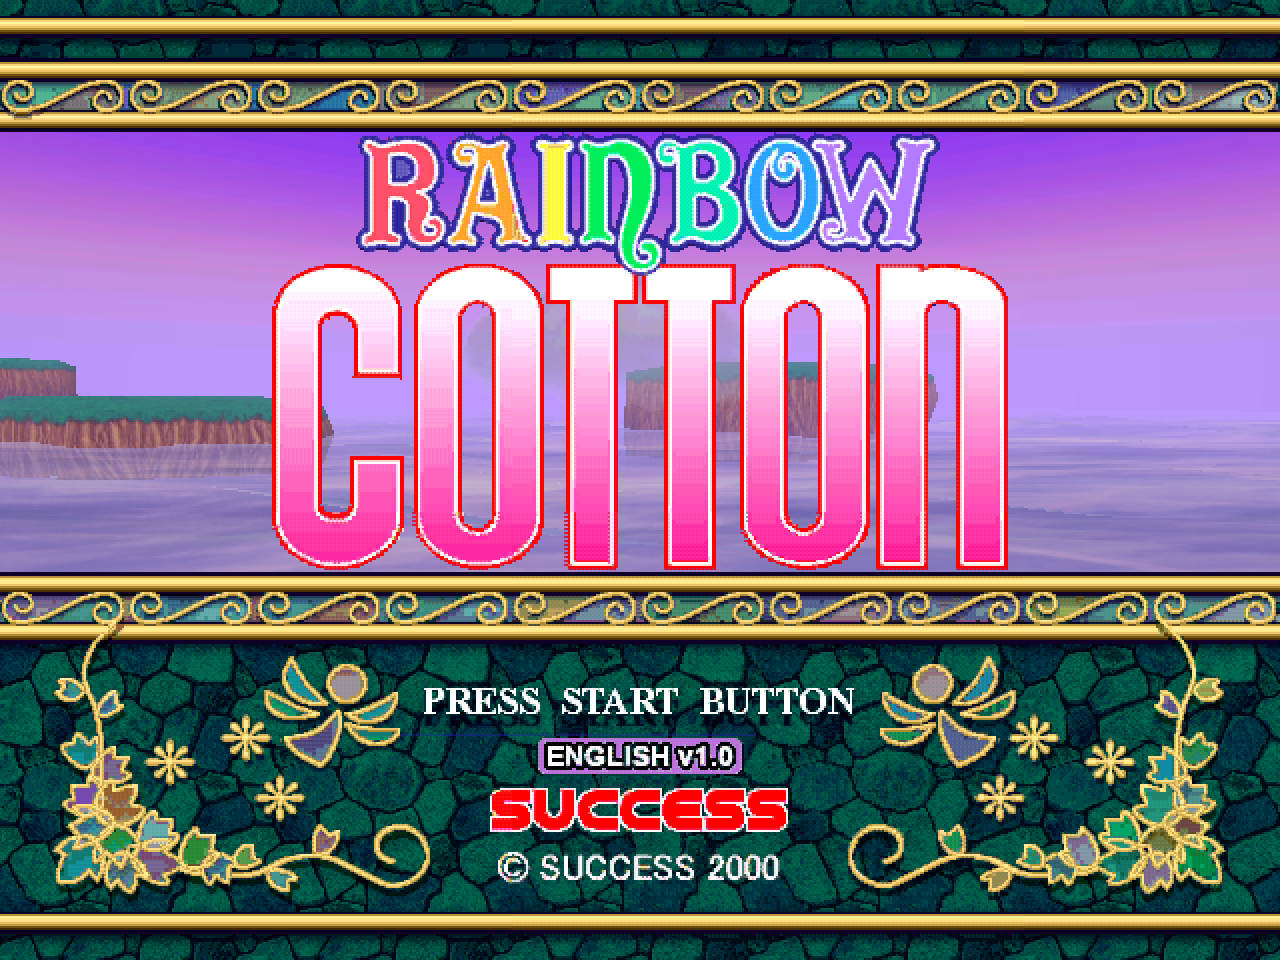 [v1.0 Released] English Translation Patch of "Rainbow Cotton".